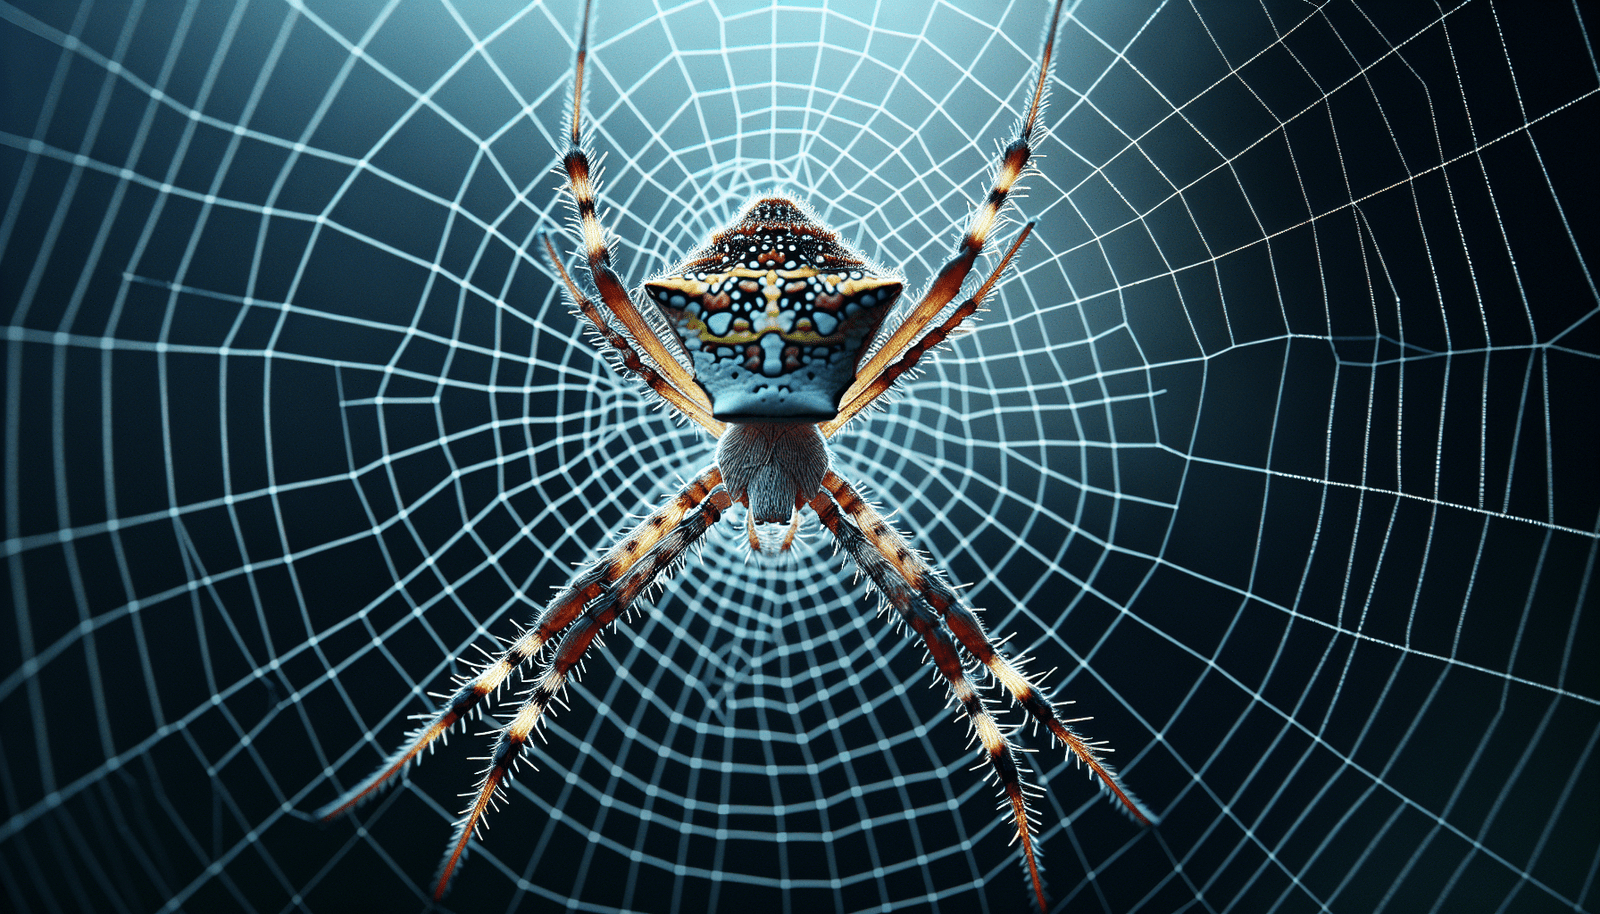 Can You Discuss The Characteristics Of The Delicate Triangle-weaving Spider And Its Care Requirements?